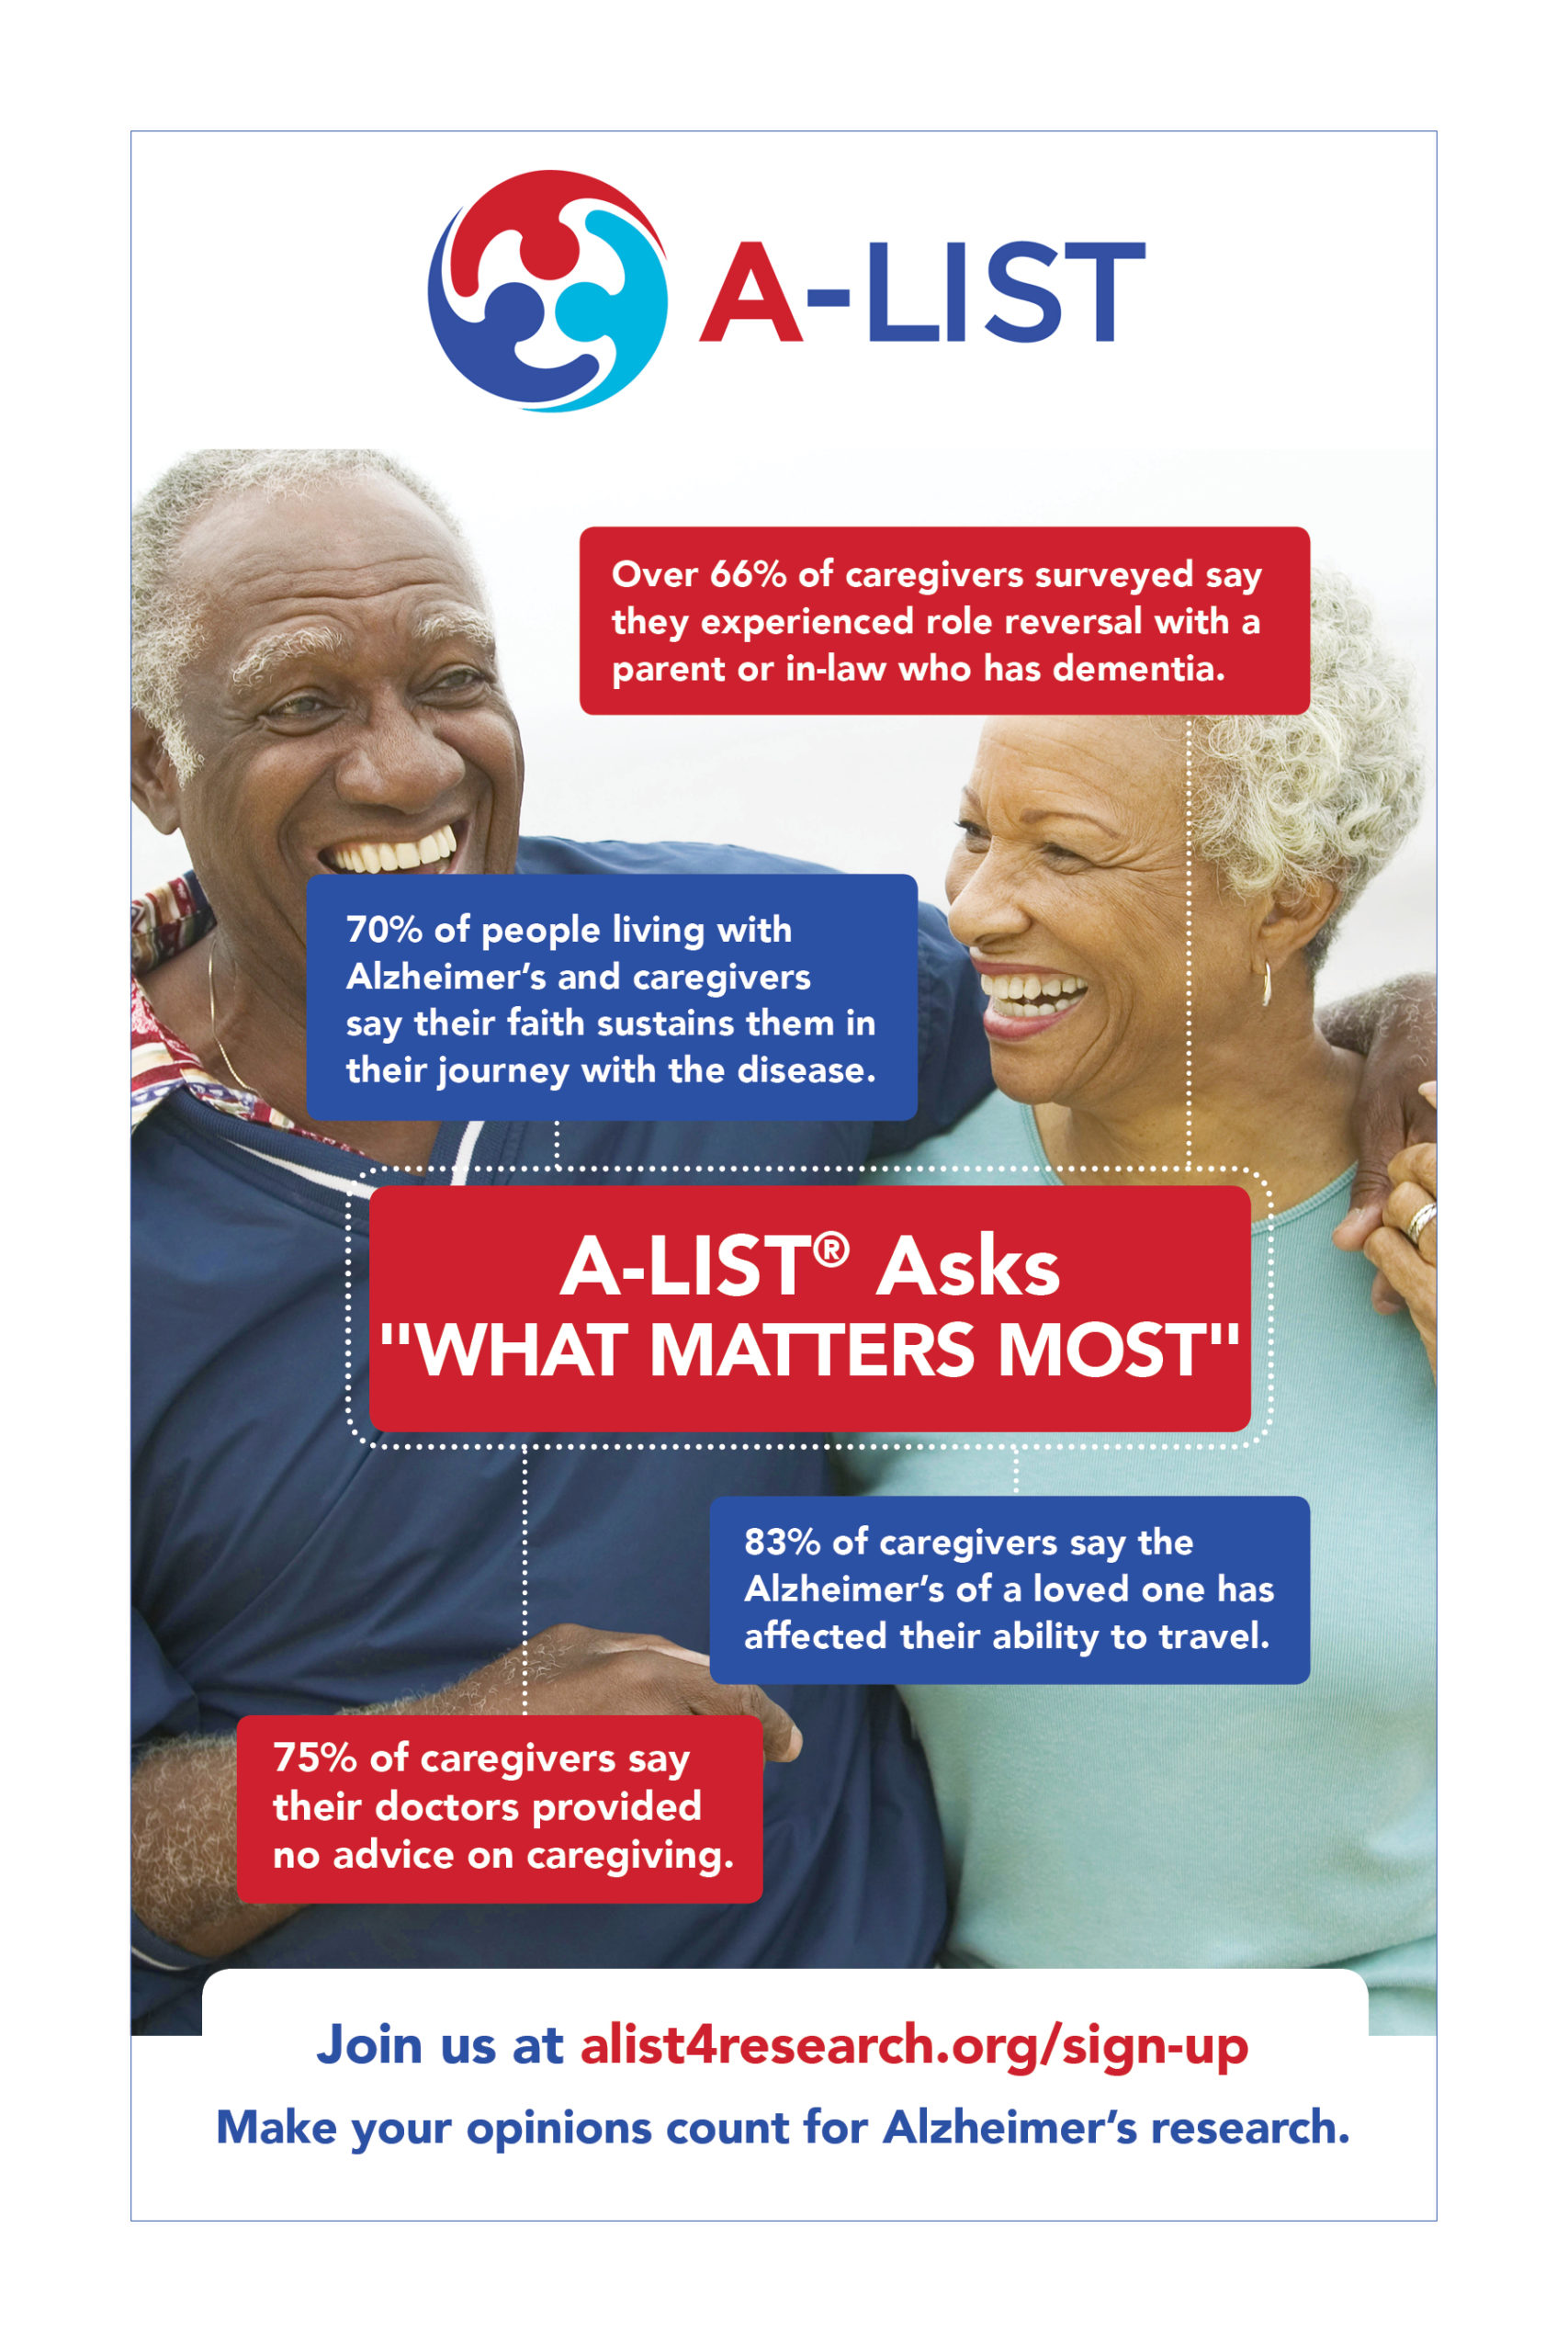 UsAgainstAlzheimer’s wants to know: What Matters Most?